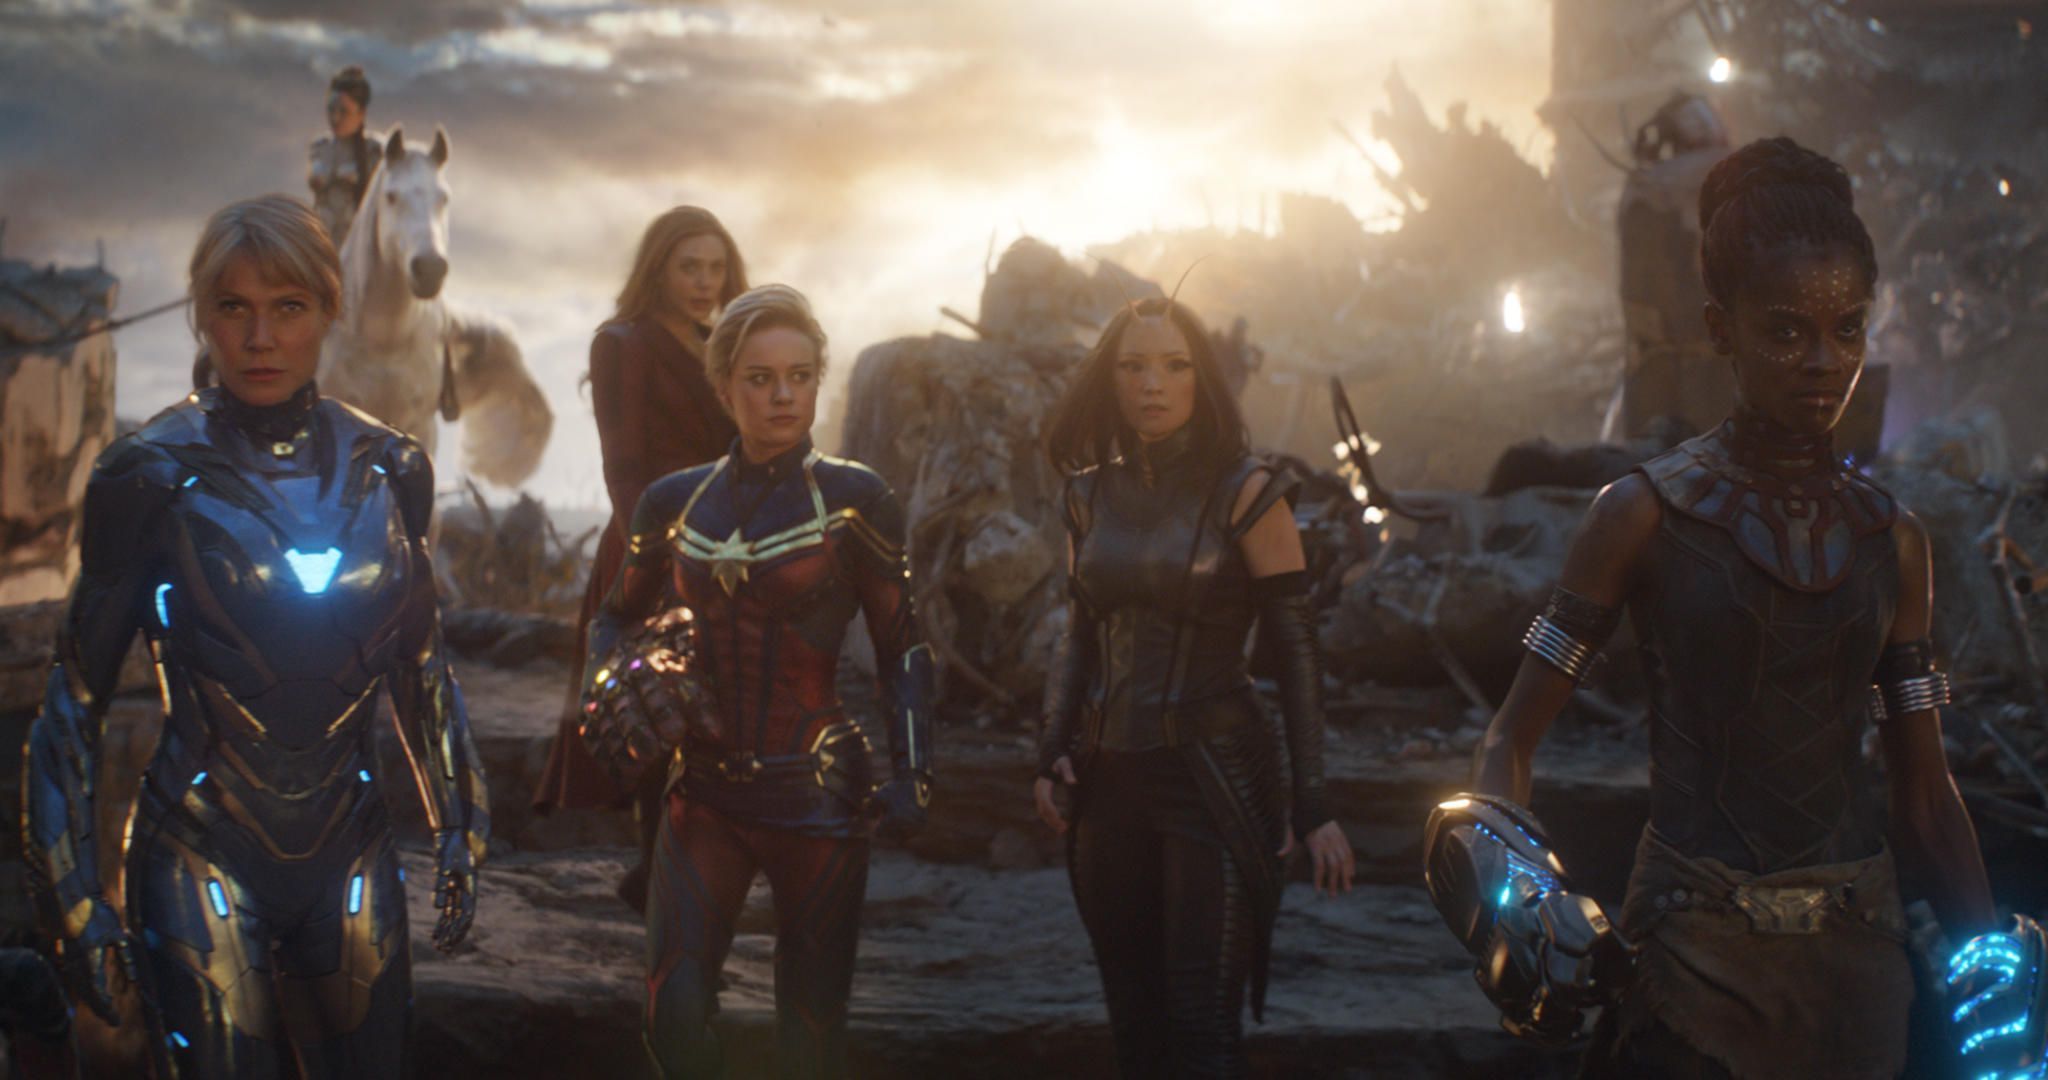 Marvel Women Tell Kevin Feige They Want An All Female Superhero